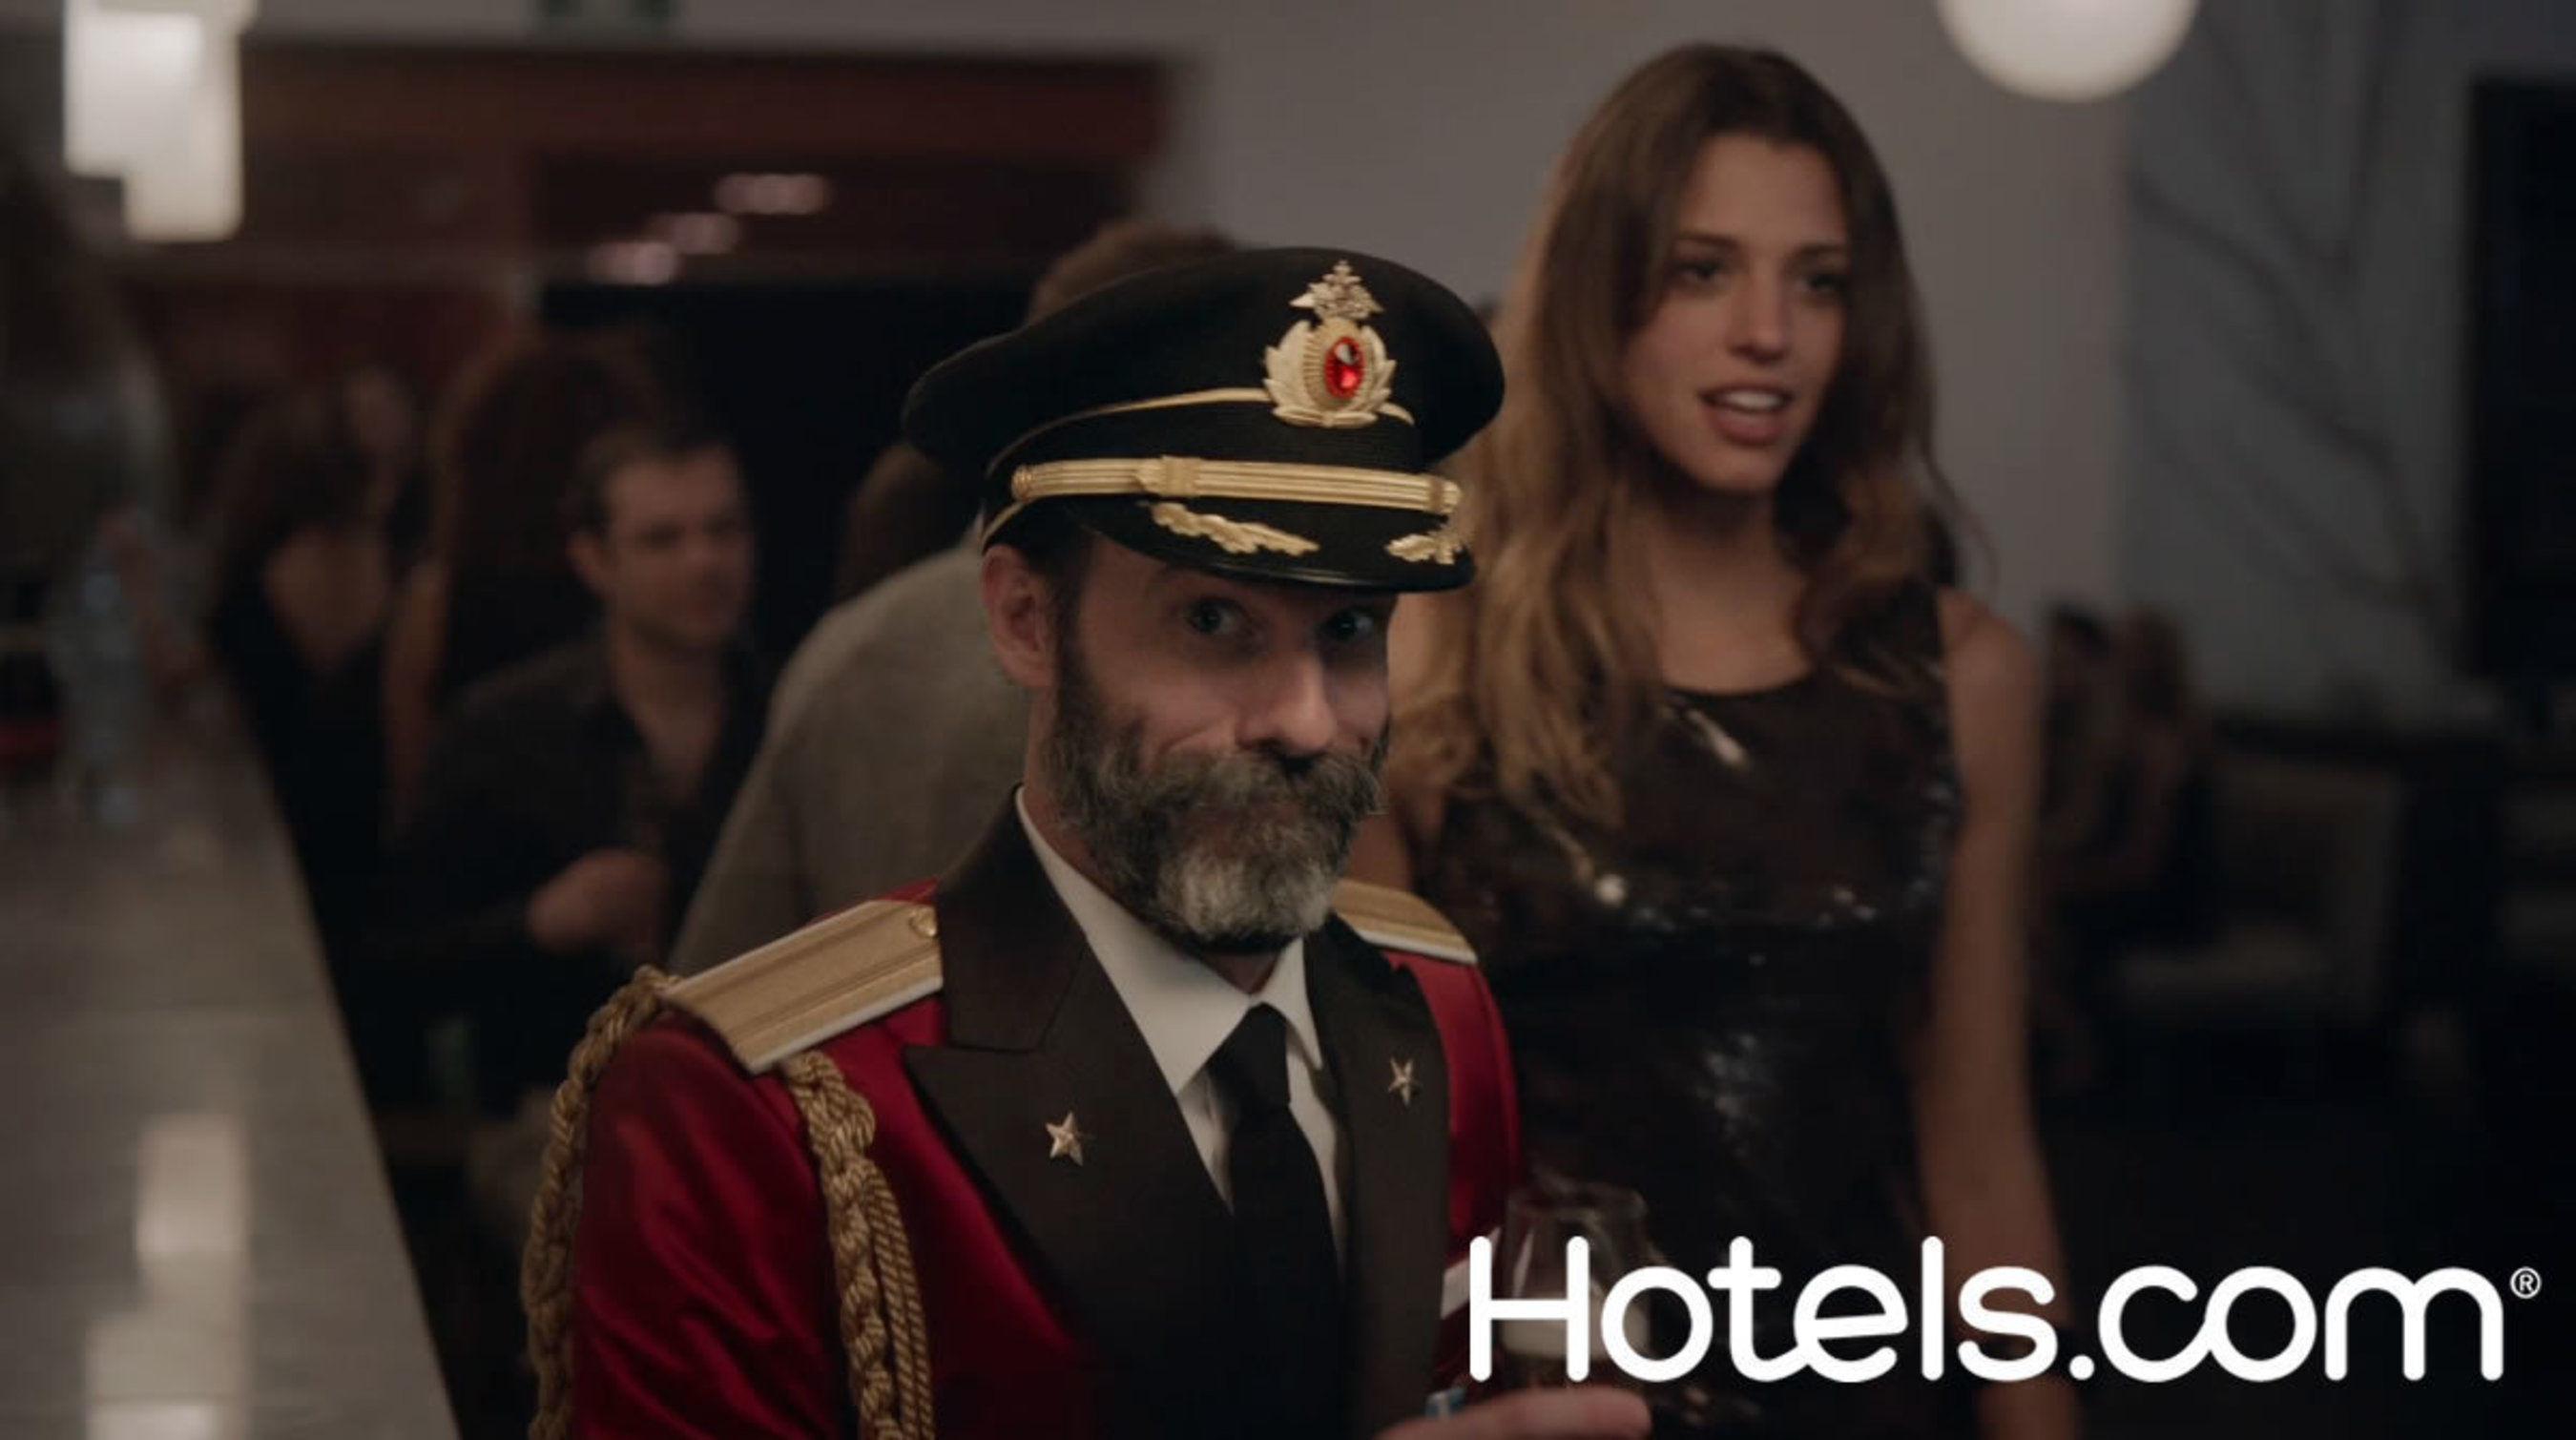 Hotels.com wins Bronze for Obvious Choice campaign at Cannes Lions 2014. (PRNewsFoto/Hotels.com)